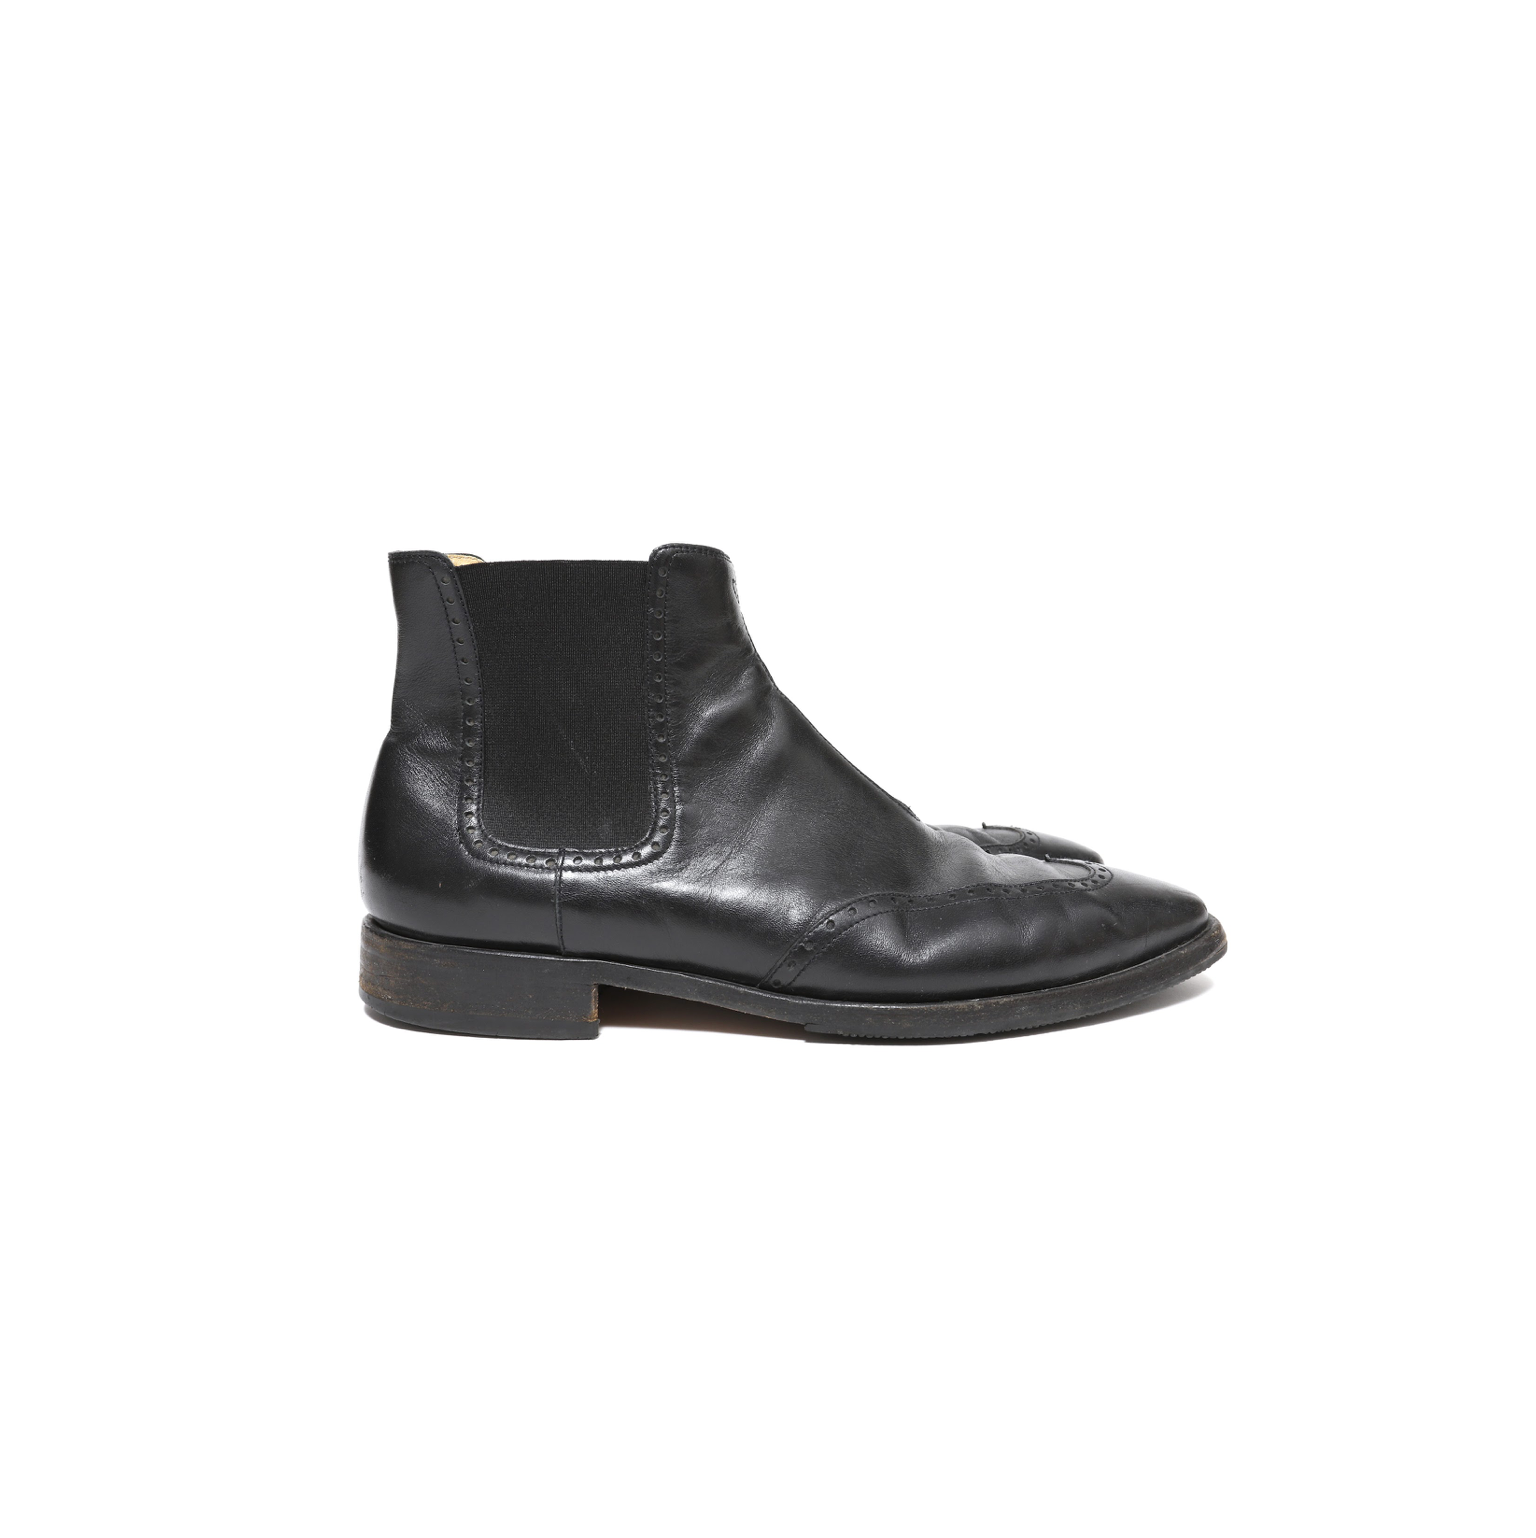 Helmut Lang AW04 Brogue Chelsea Boots